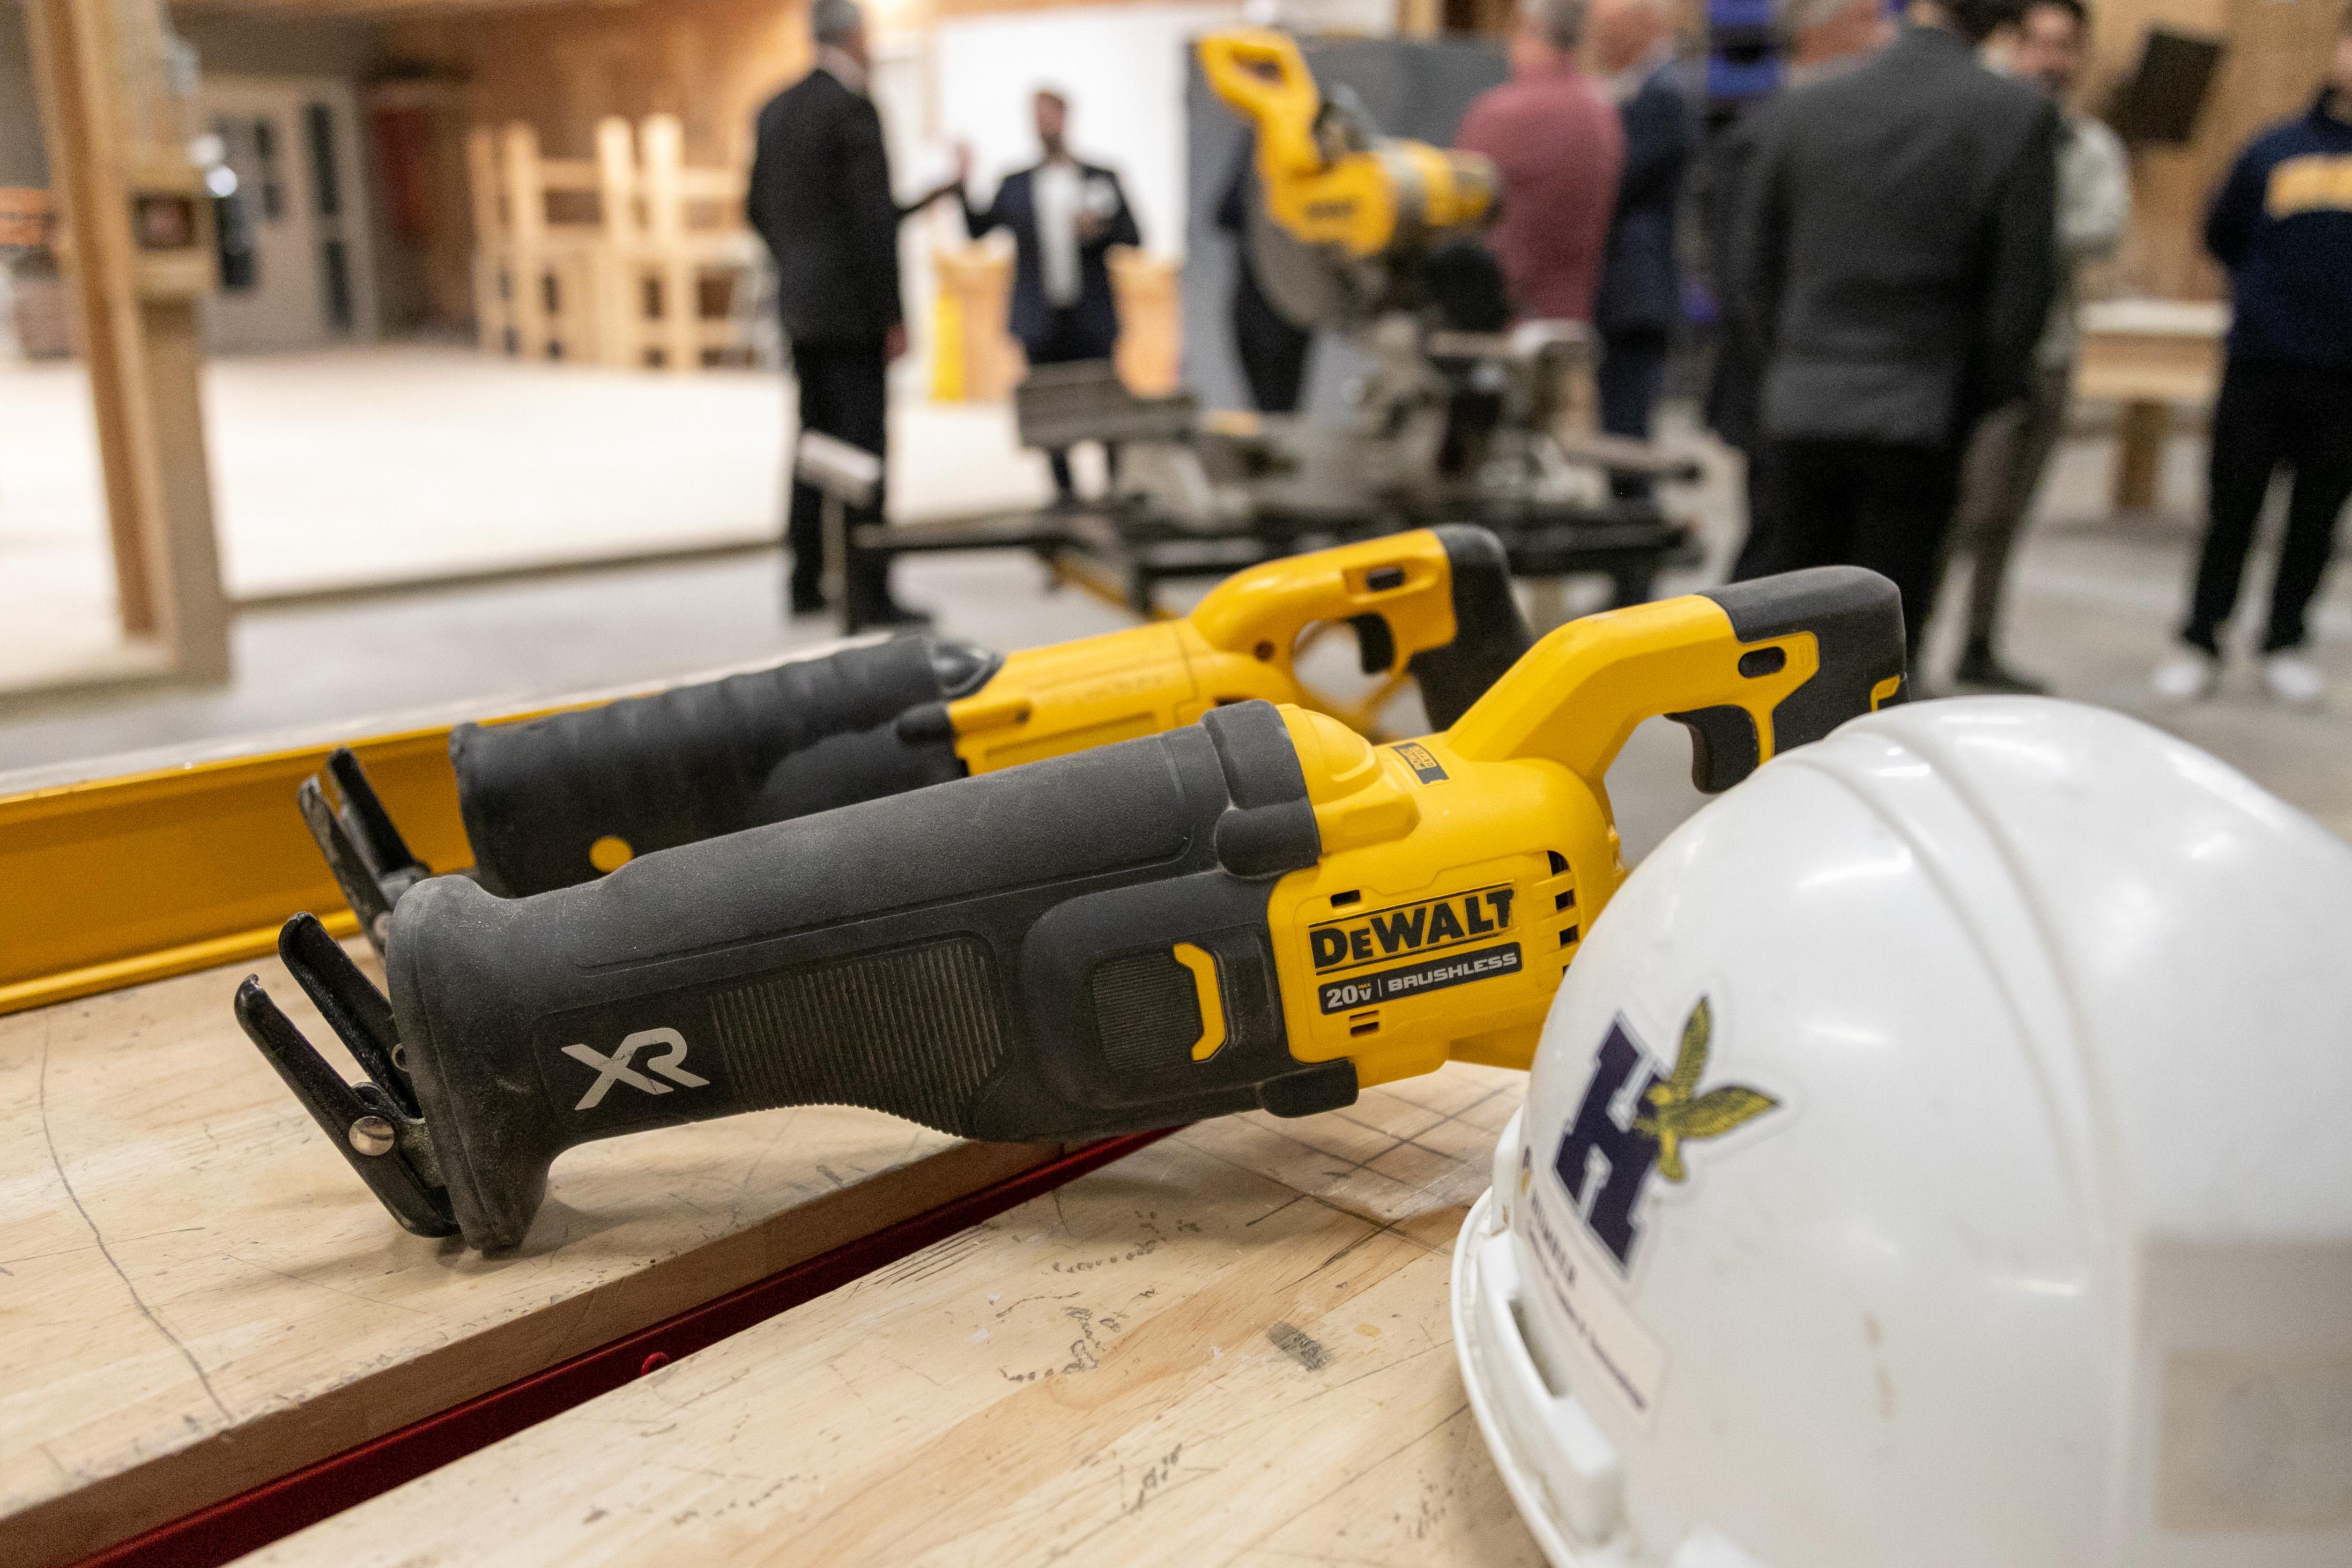 DEWALT power tools sit on a table next to a helmet with the Humber College logo.